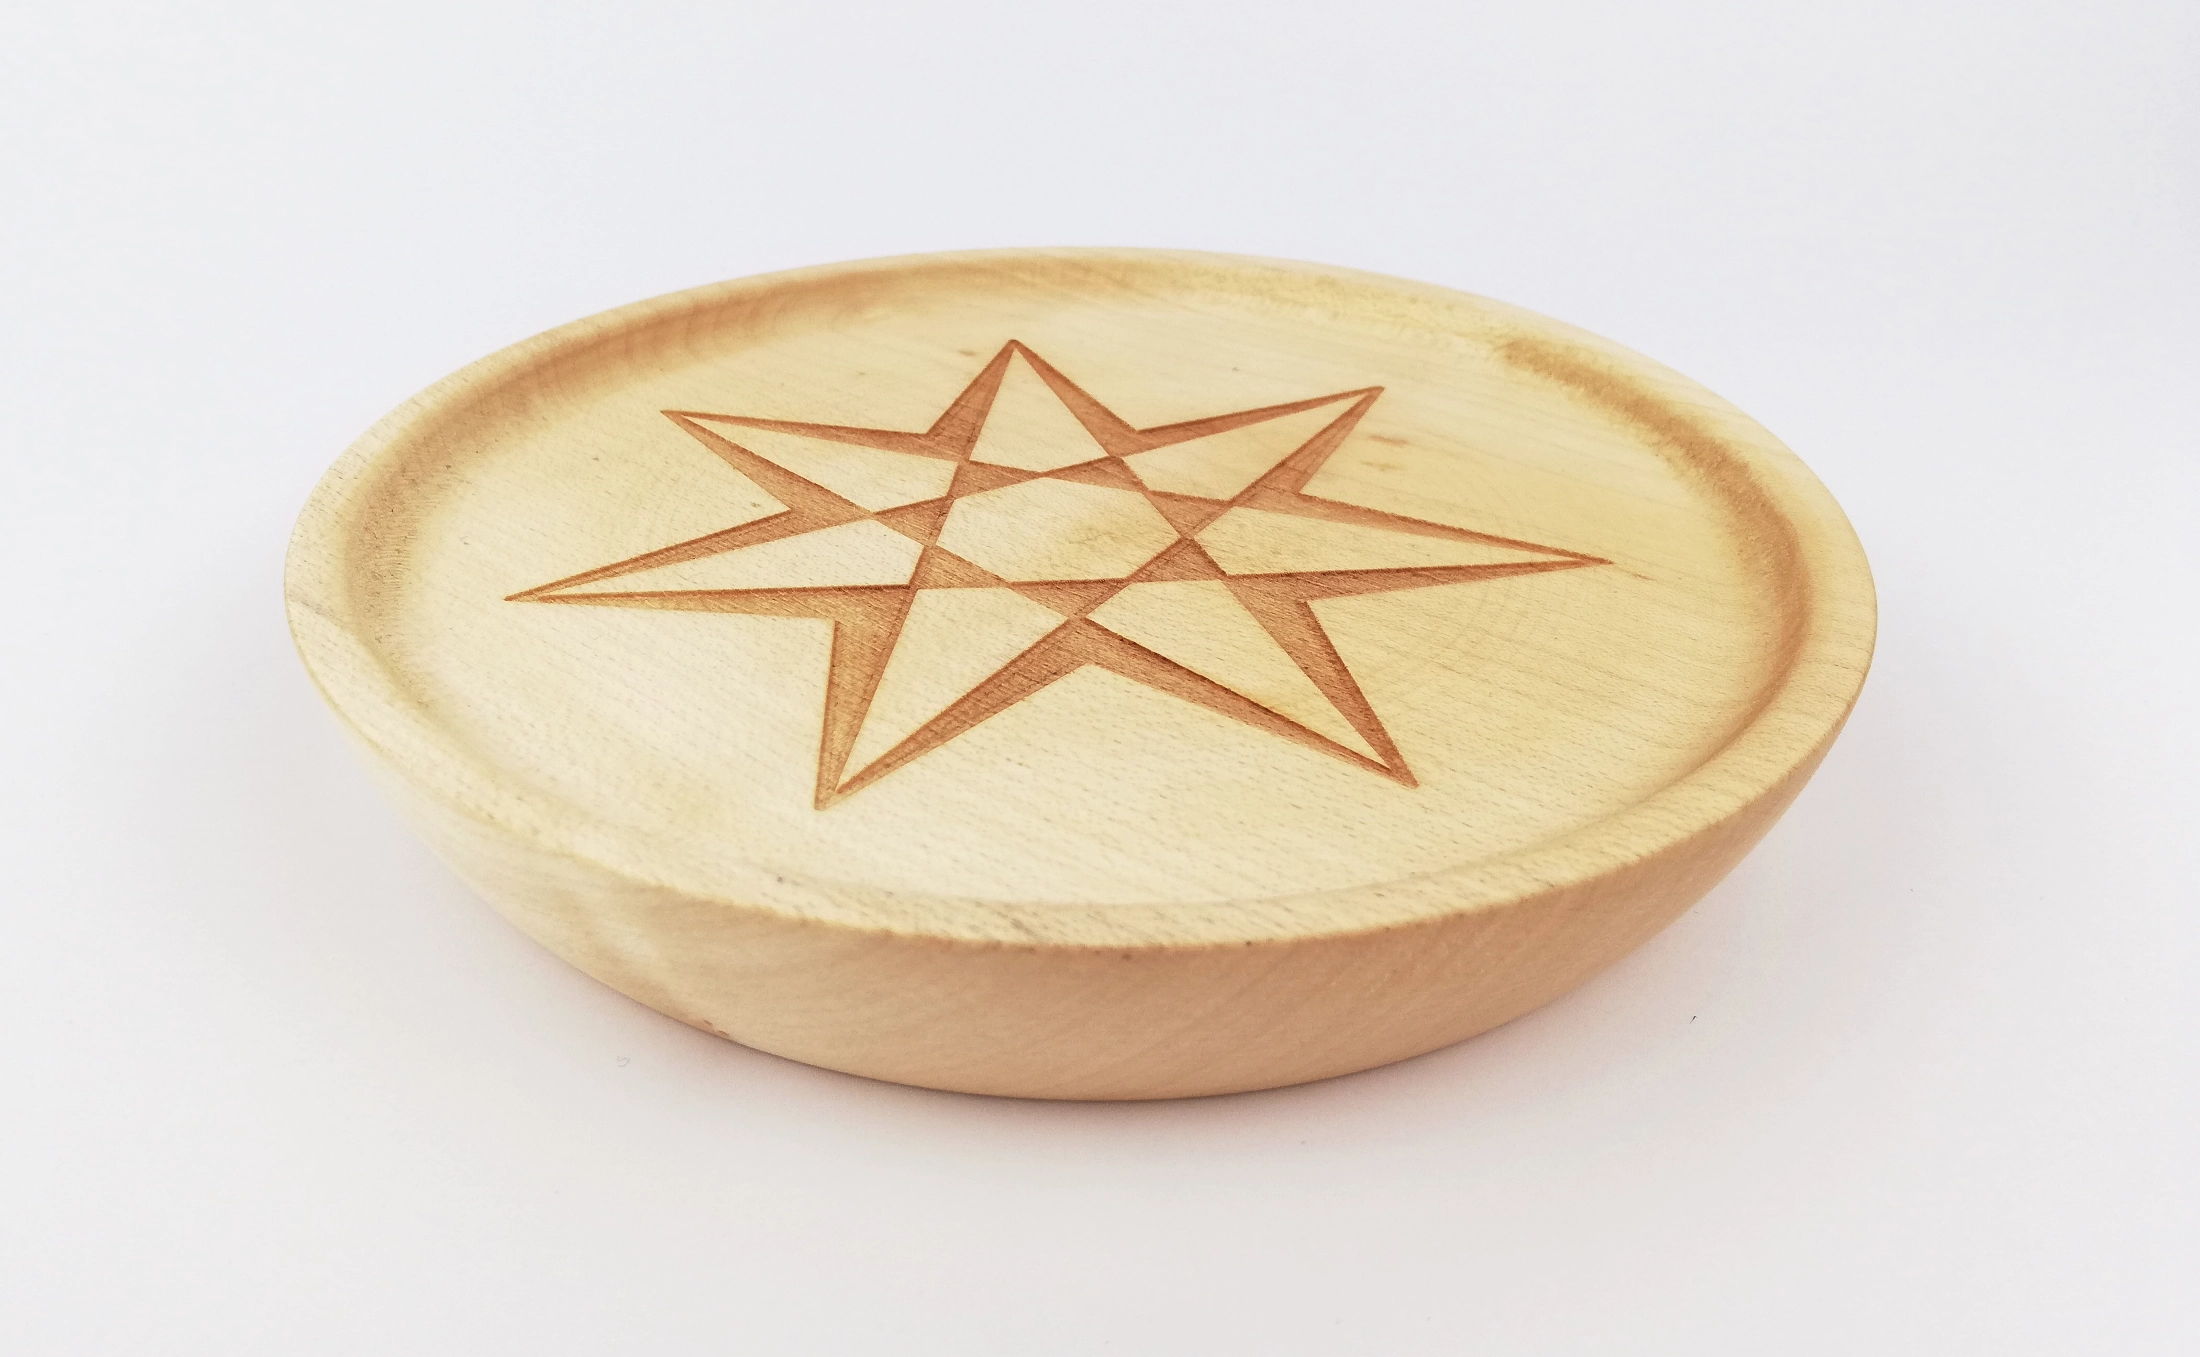 Heptagram on a small plate (16cm/6.3in in diameter), side.